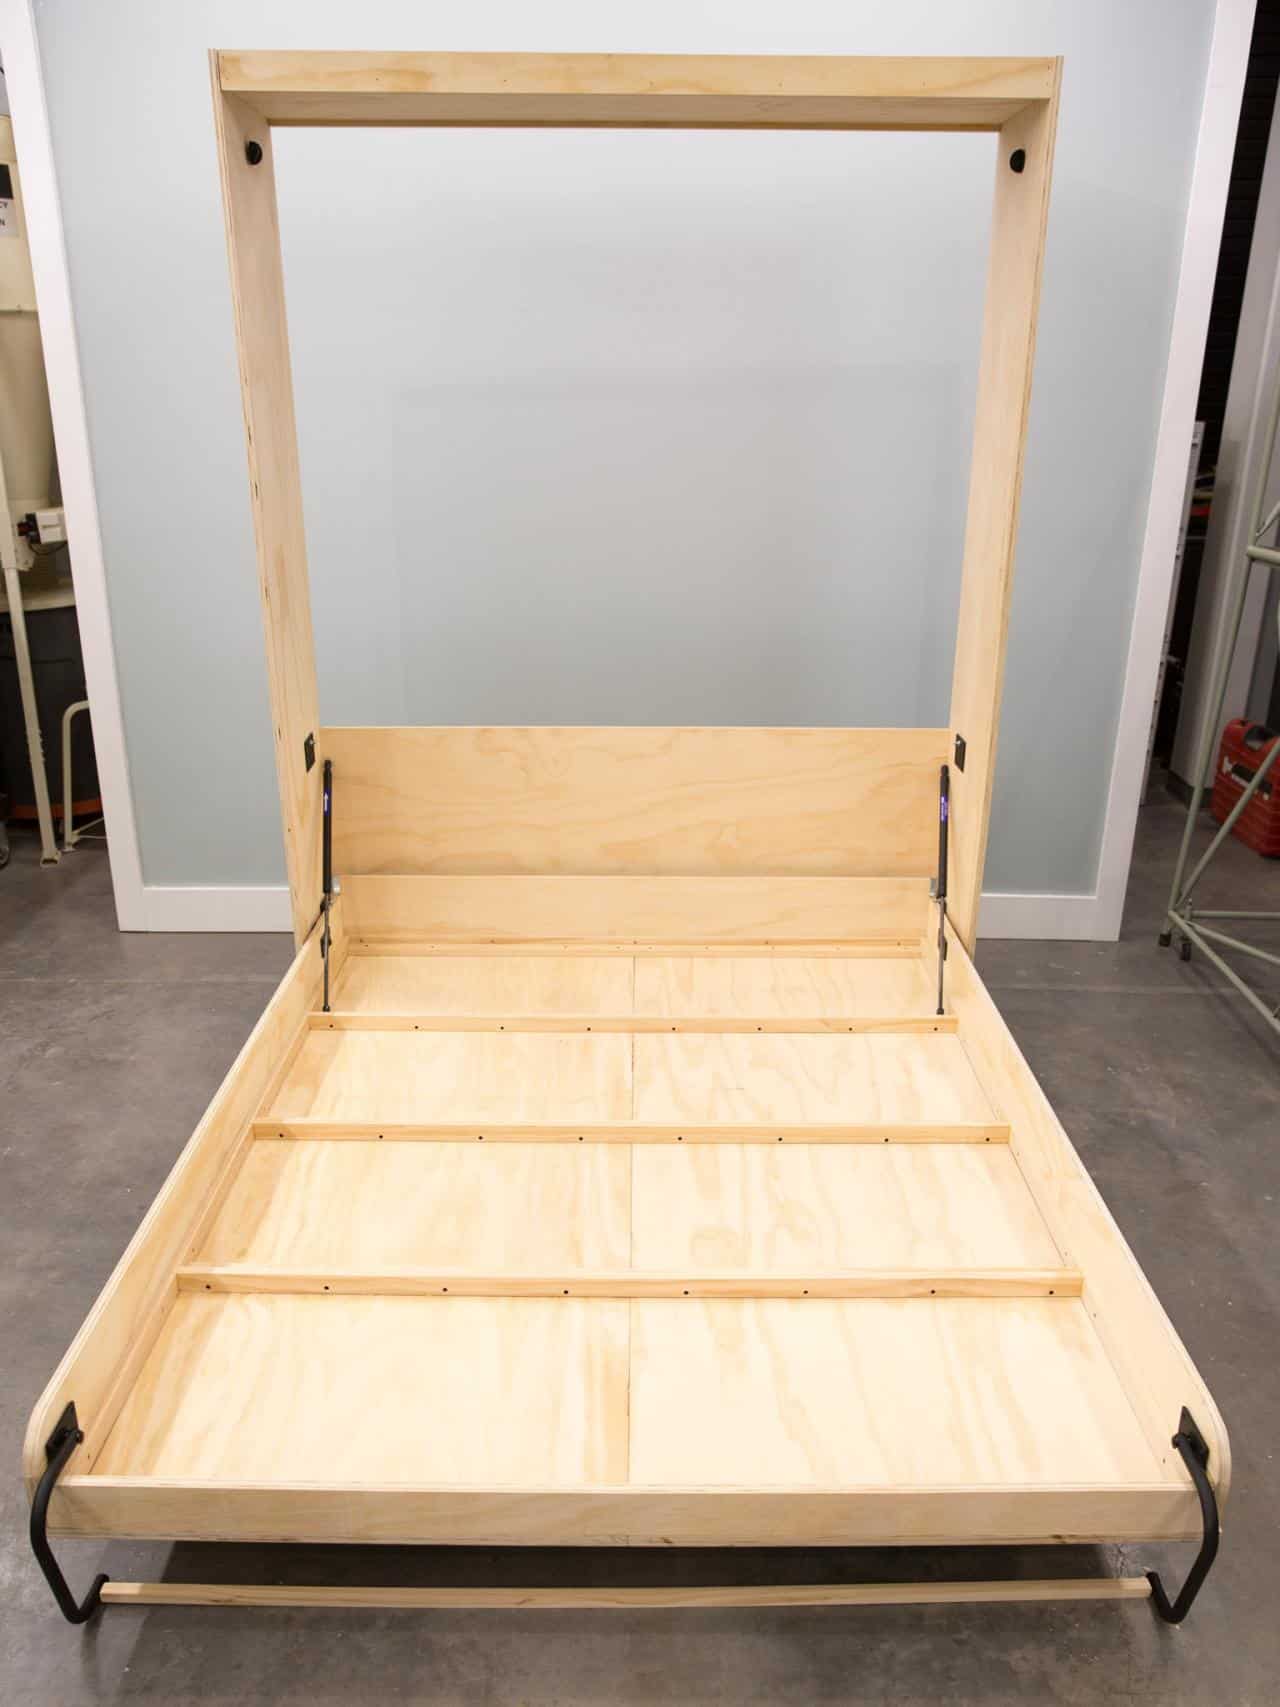 Diy Murphy Bed Ideas For Small Spaces, Twin Murphy Bed With Desk Ikea